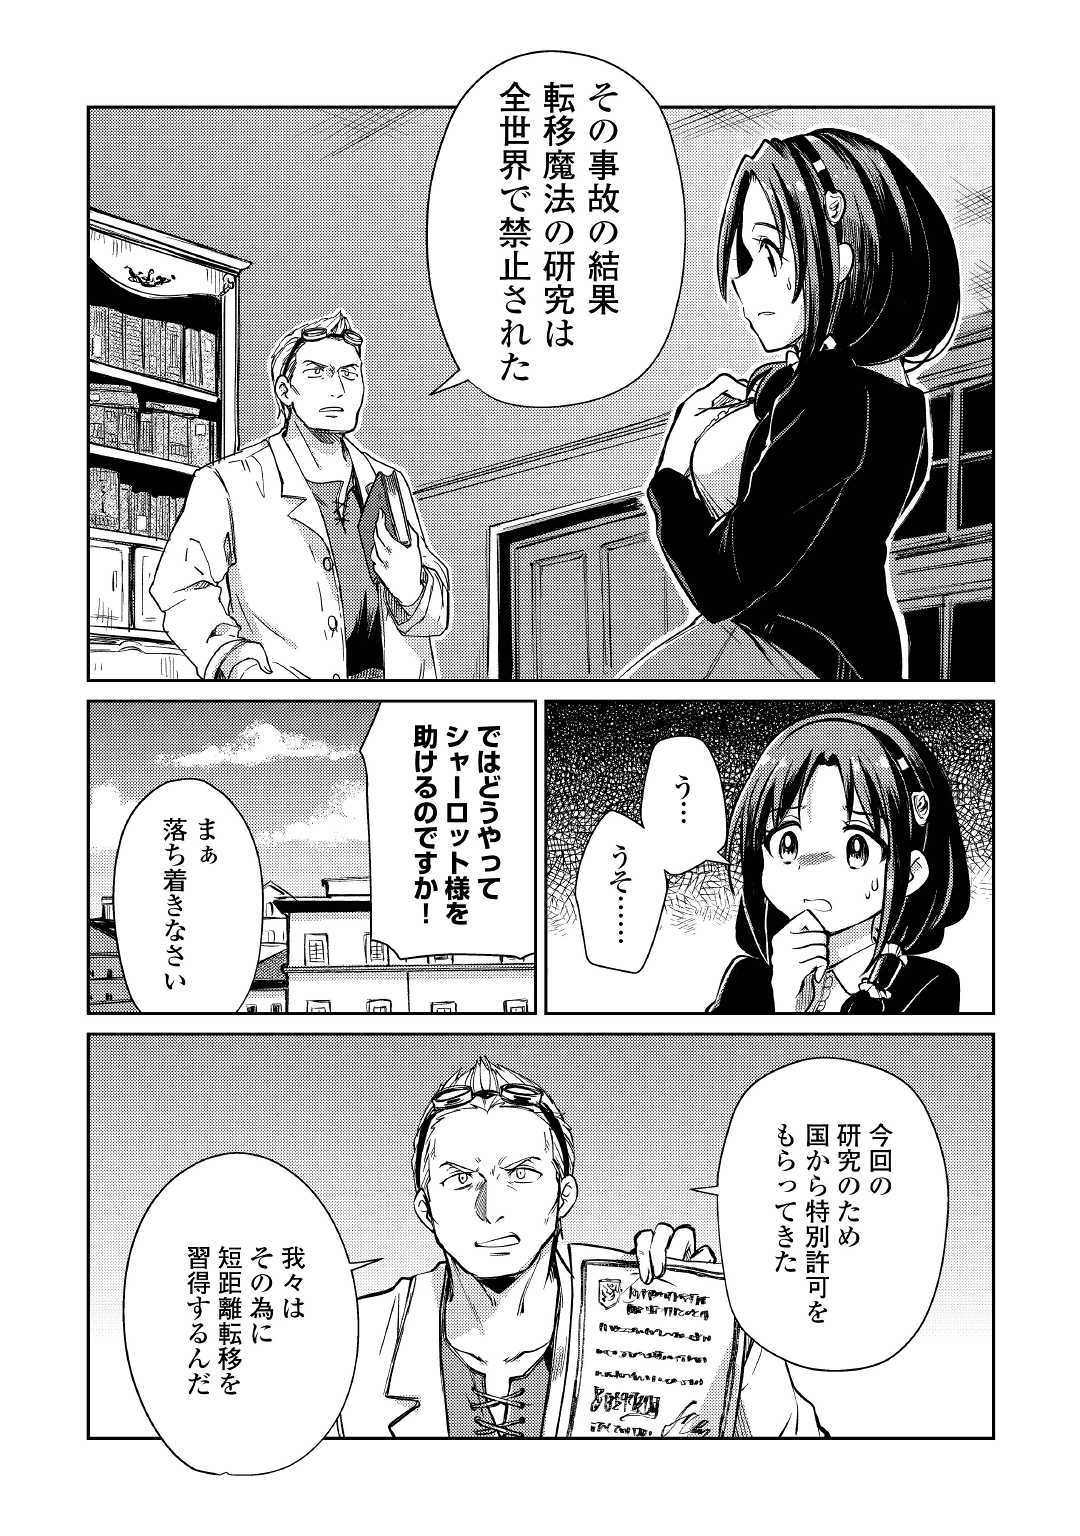 The Former Structural Researcher’s Story of Otherworldly Adventure 第19話 - Page 22